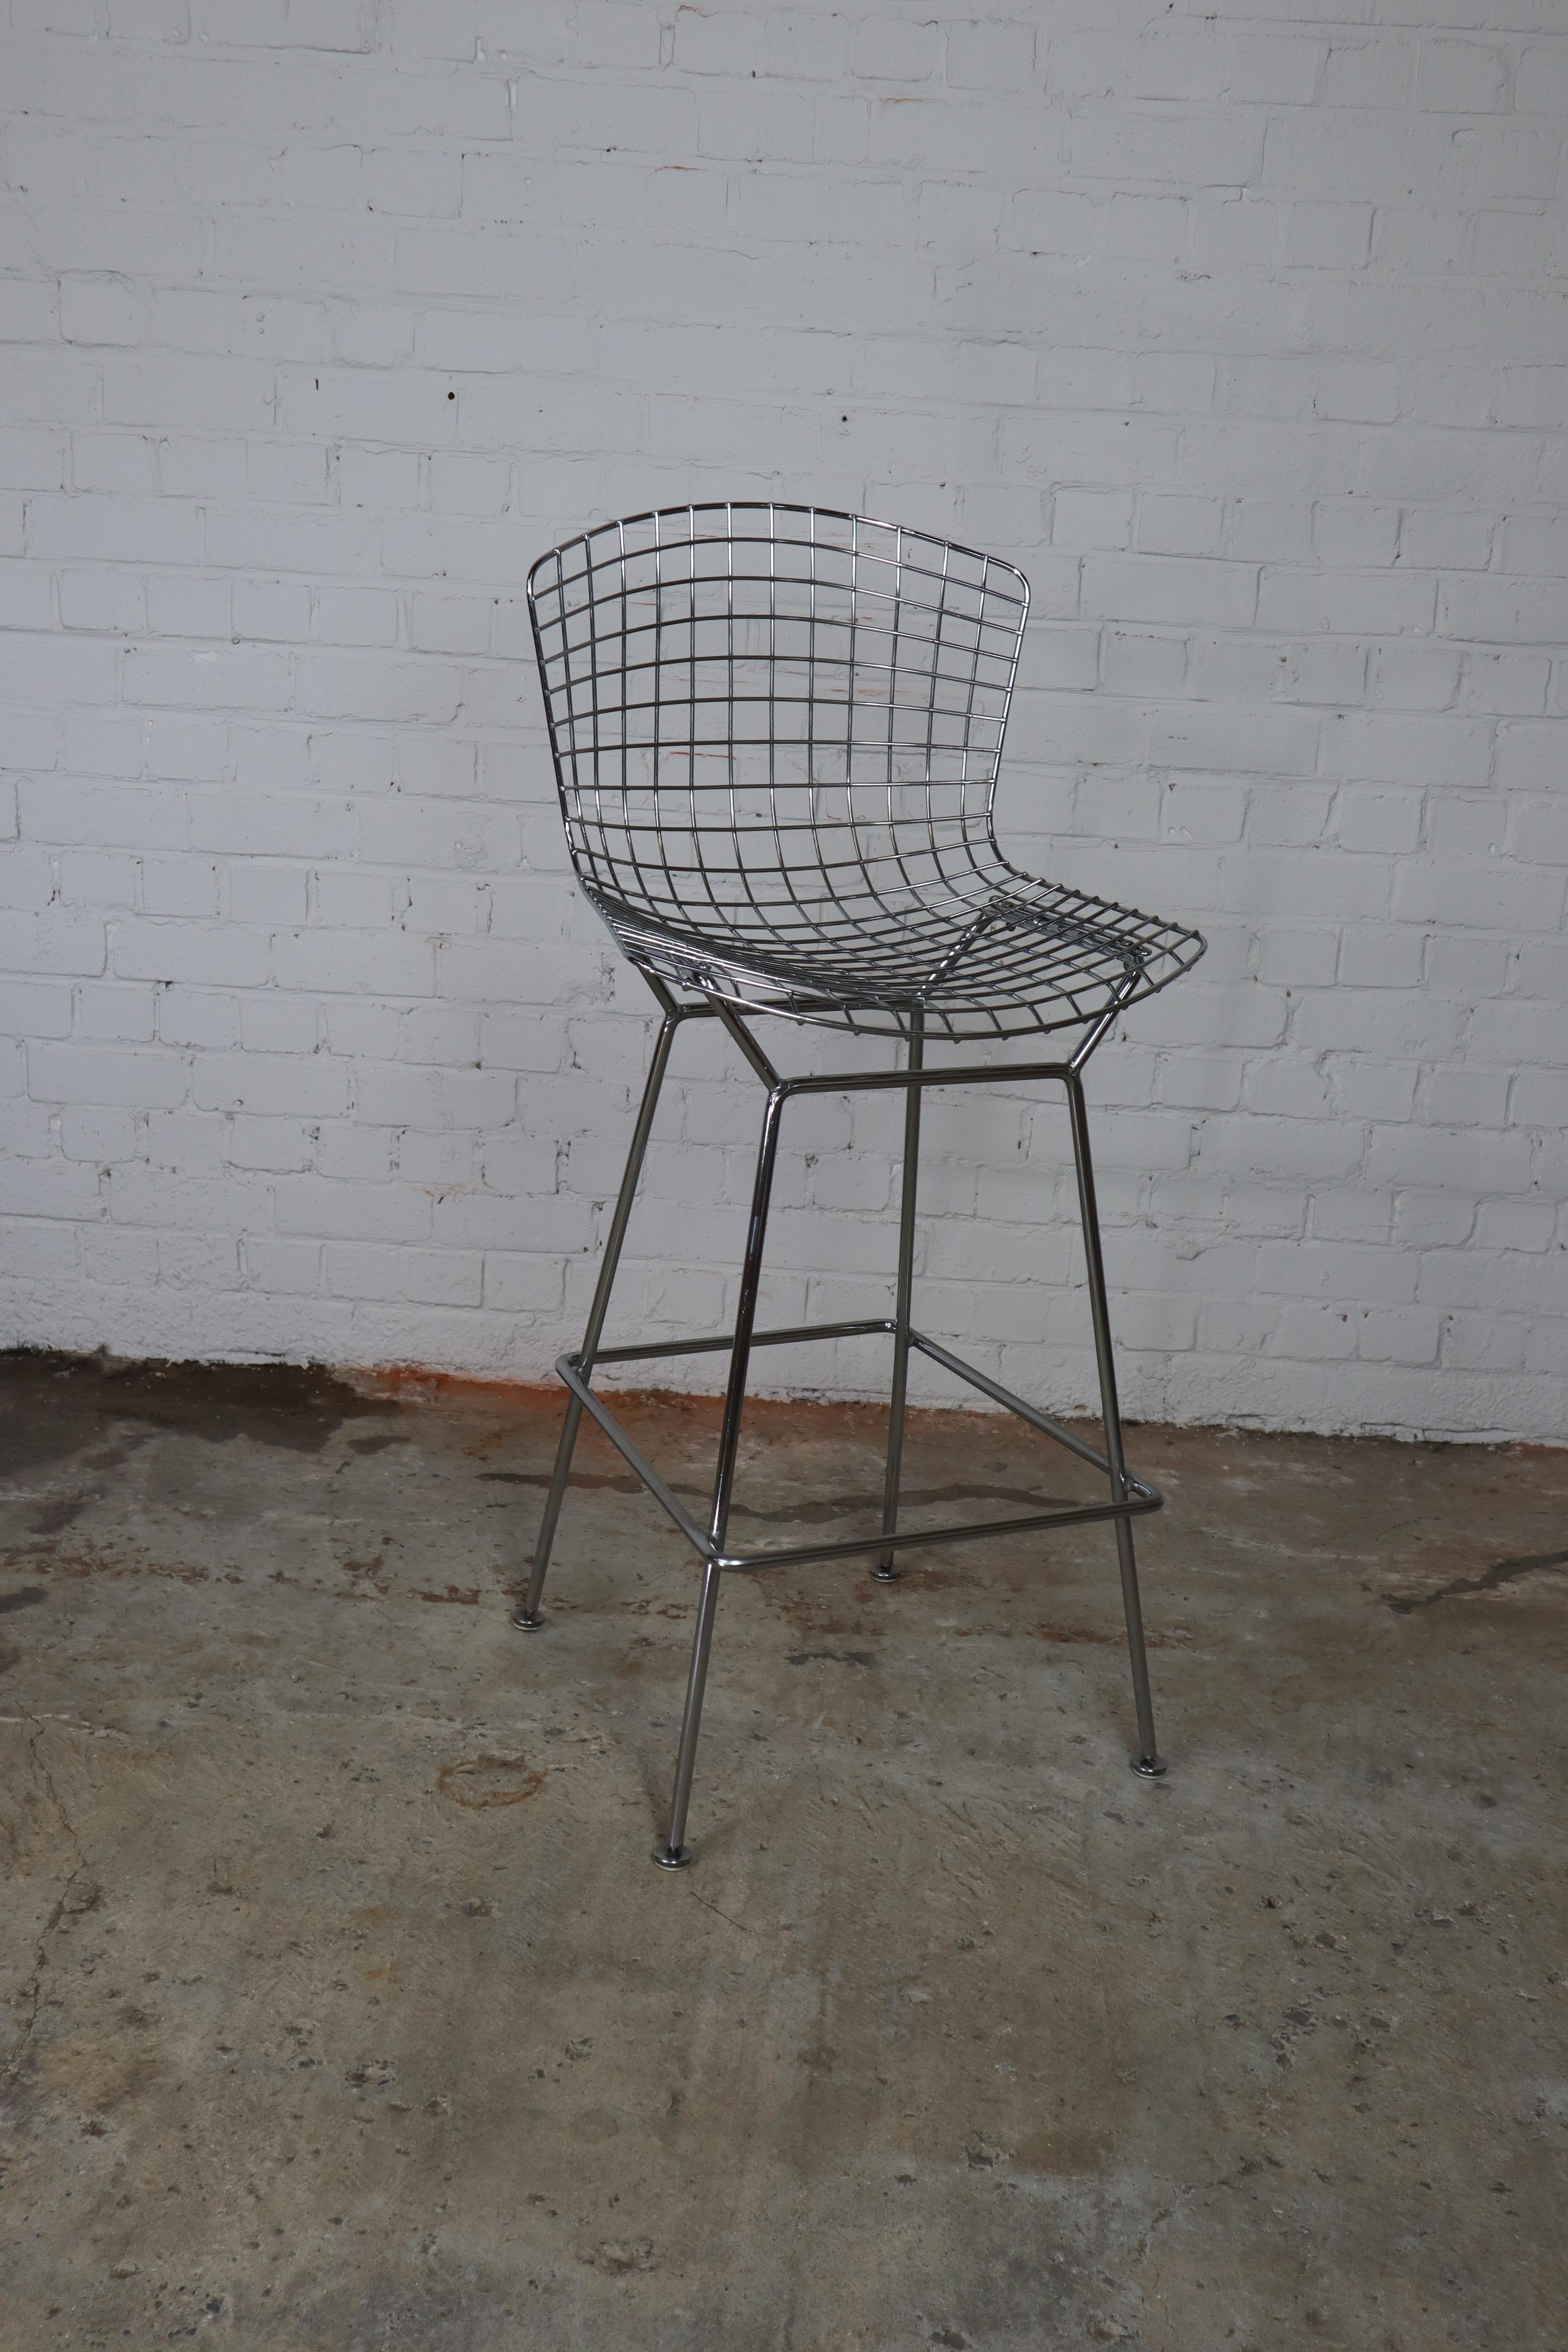 Vintage Bertoia bar stool for Knoll, early edition, manufactured by De Coene Belgium.
De Coene was licence holder for the manufacturing of Knoll furniture and produced most Knoll furniture on the West-European market.